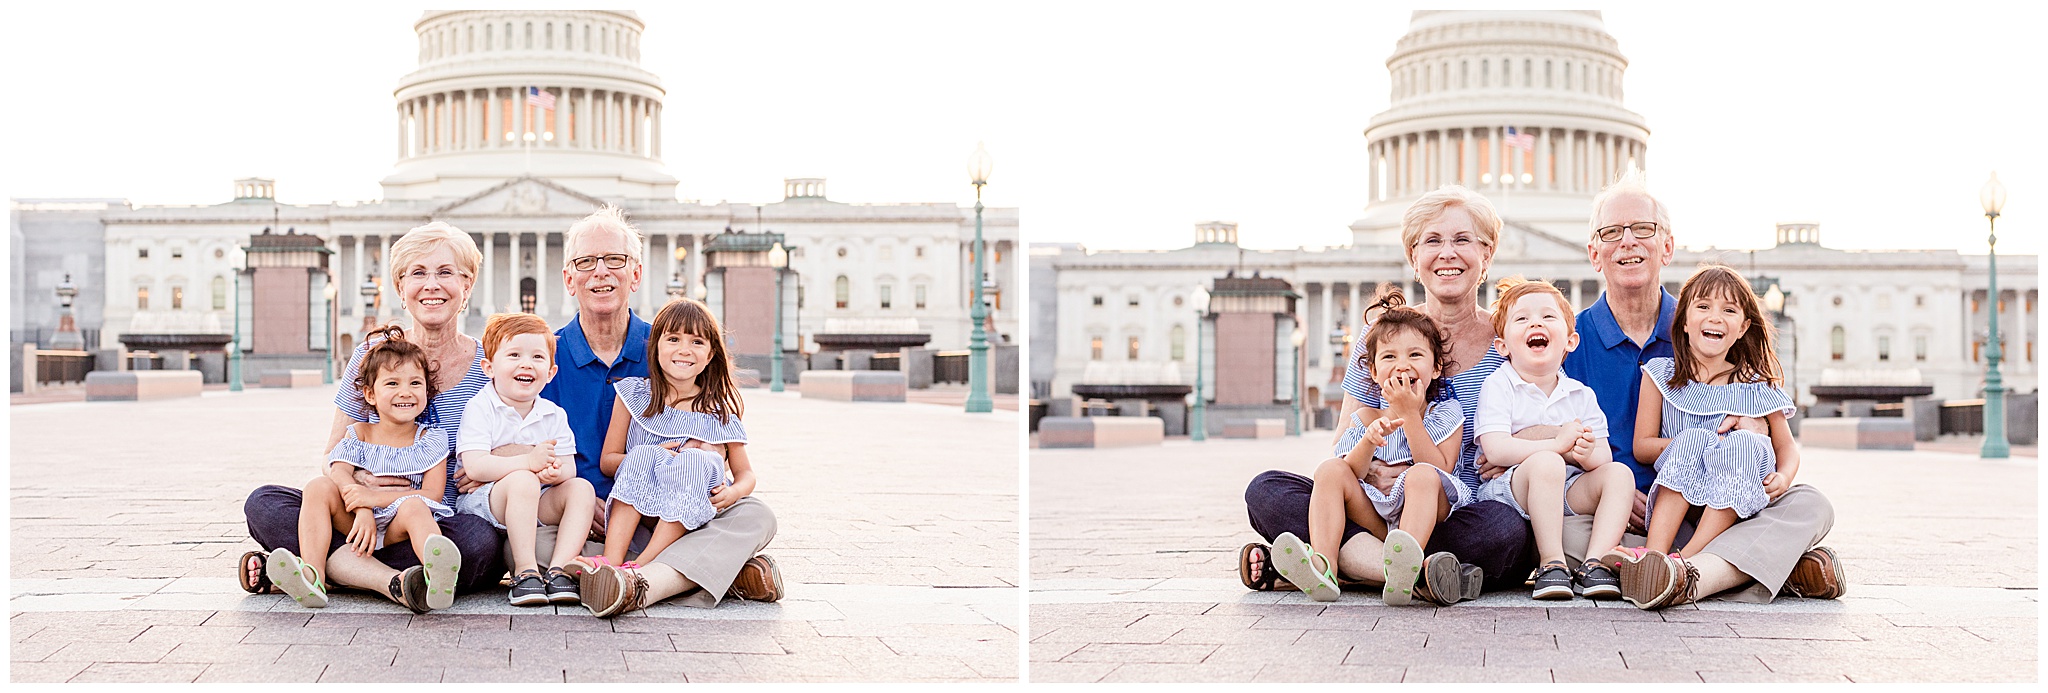 Grandparents Photo Shoot at the Capitol in Washington DC by Kofmehl Photography